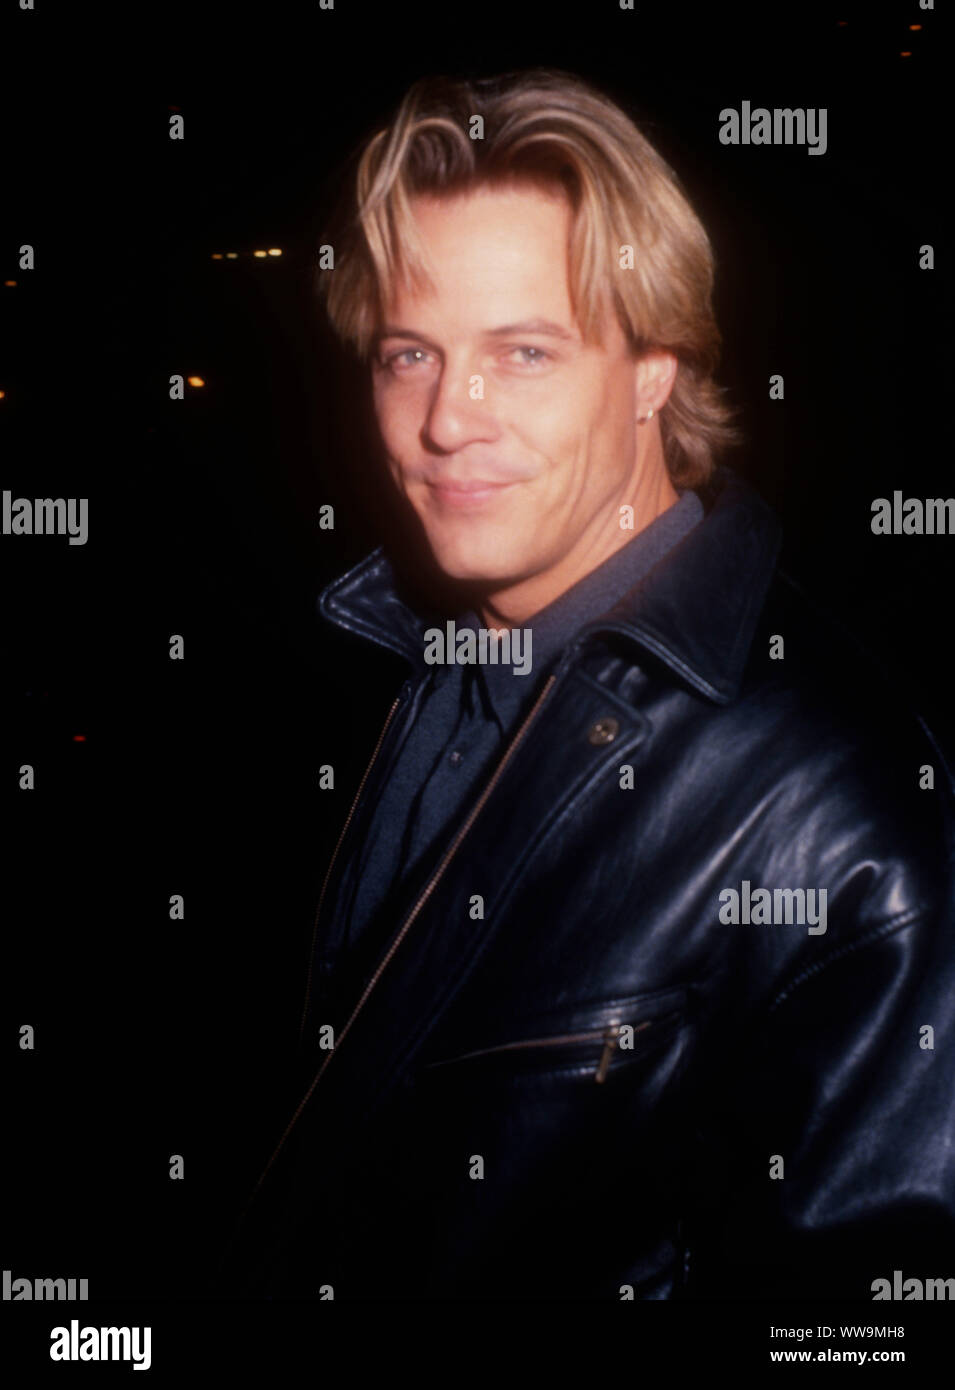 Beverly Hills, California, USA 8th December 1994 Actor Don Michael Paul attends Aaron Spelling's Annual Holiday Party on December 8, 1994 at Beverly Wilshire Hotel in Beverly Hills, California, USA. Photo by Barry King/Alamy Stock Photo Stock Photo